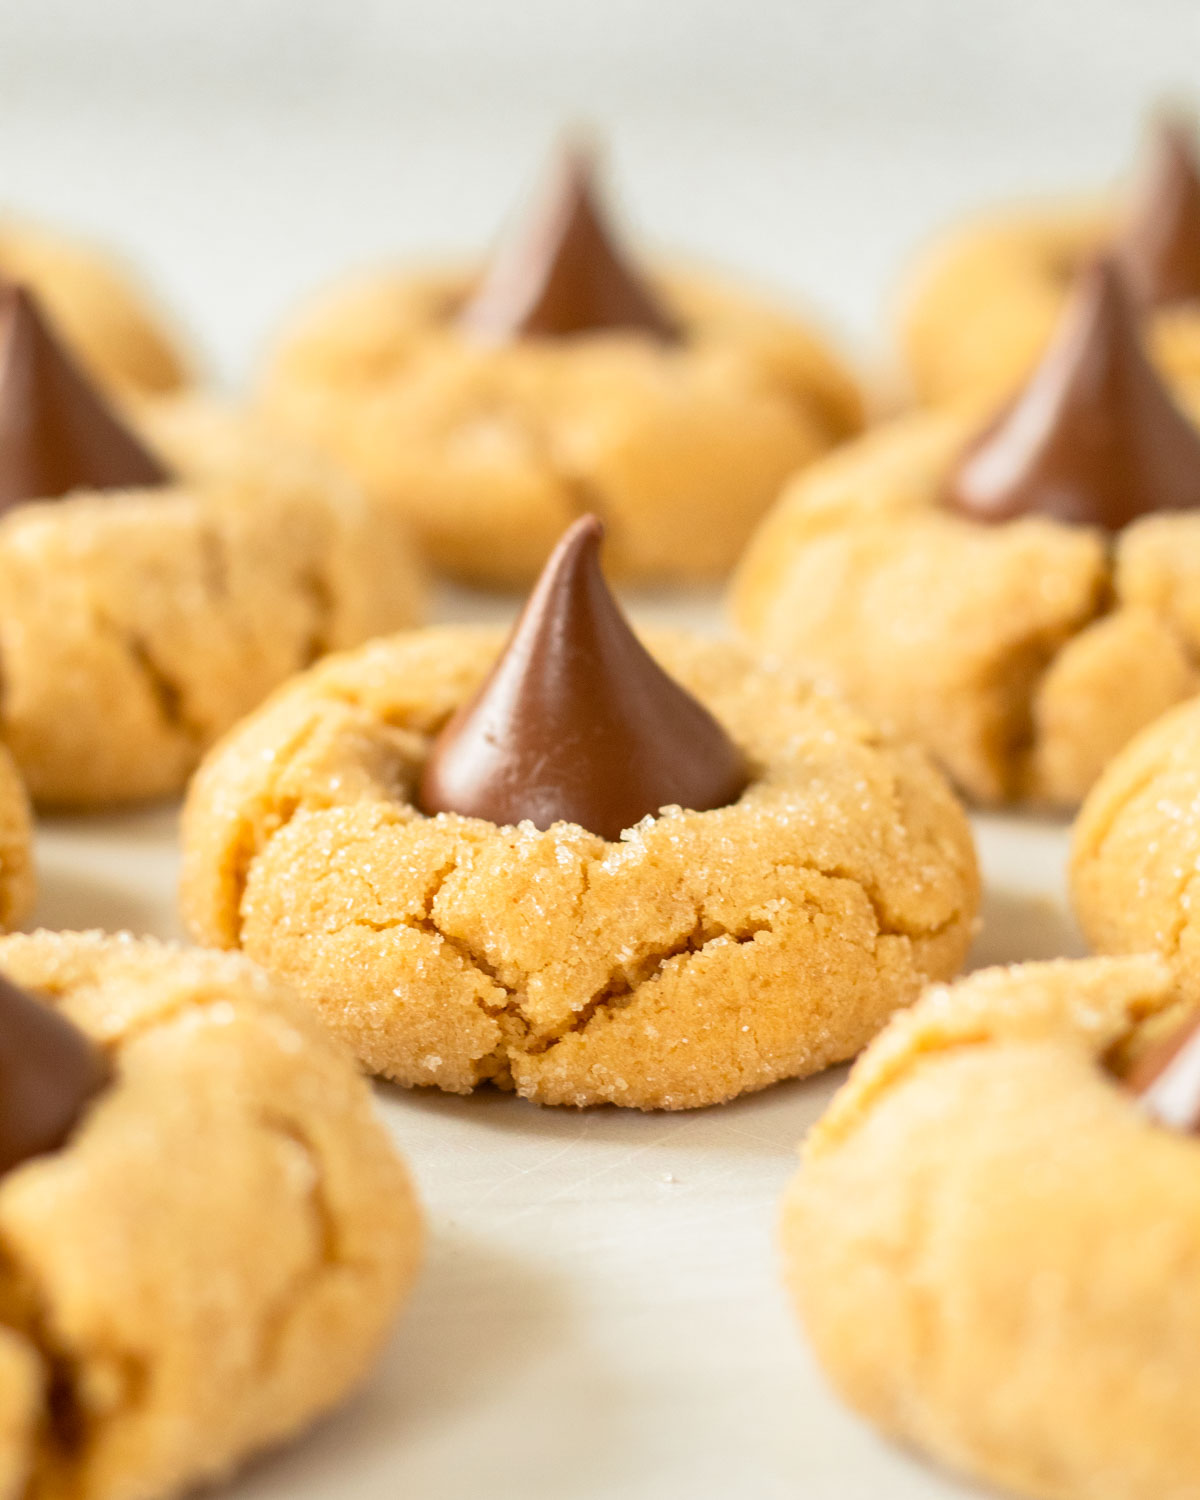 These peanut butter blossoms are a classic Christmas cookie recipe made with a flavorful peanut butter cookie dough rolled in sugar and topped with a chocolate kiss.